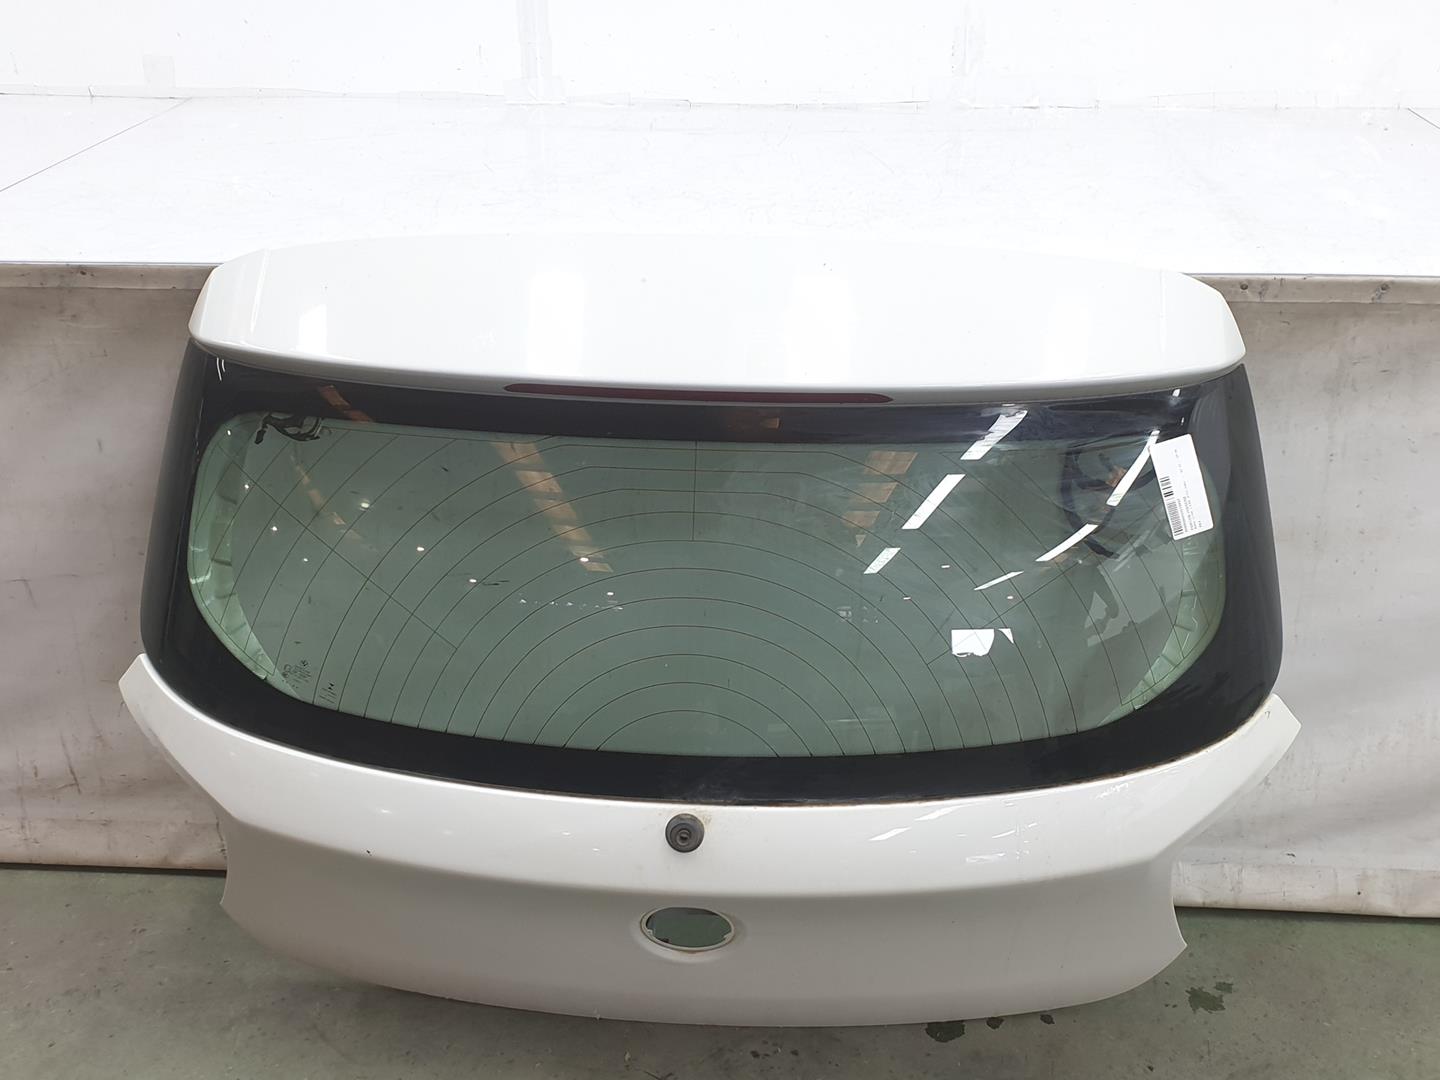 BMW 1 Series F20/F21 (2011-2020) Bootlid Rear Boot 41007305470, 41007305470, COLORBLANCO300 19894068